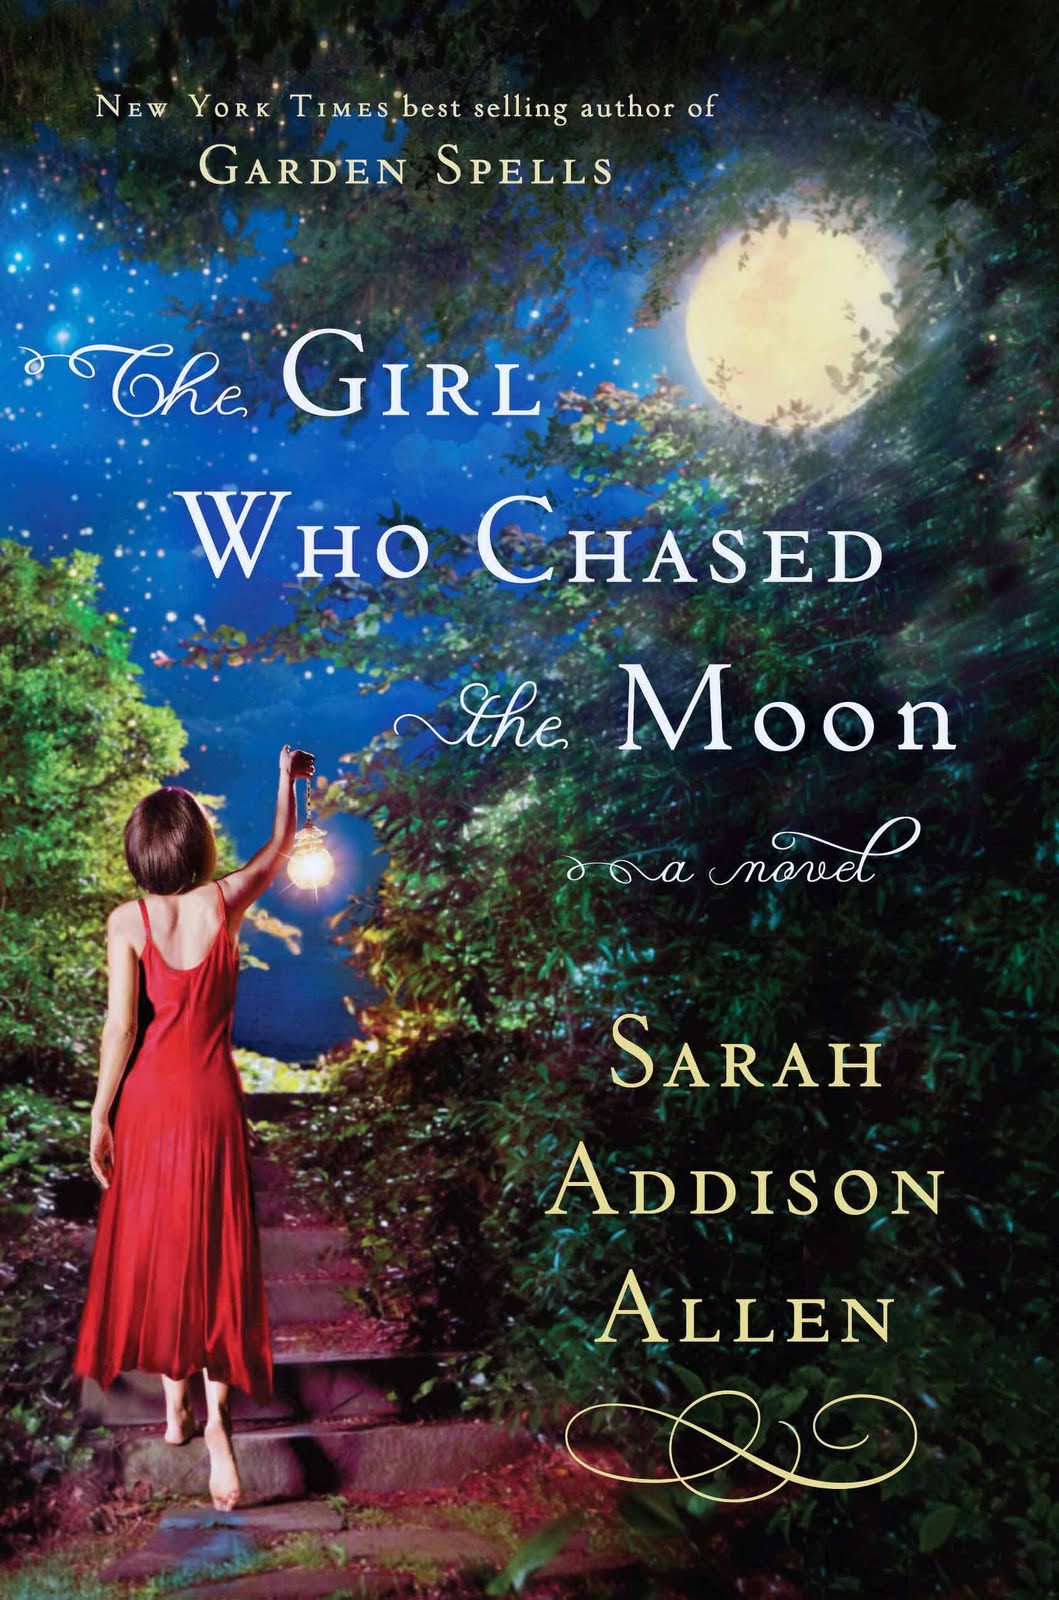 Cover of The Girl Who Chased the Moon by Sarah Addison Allen